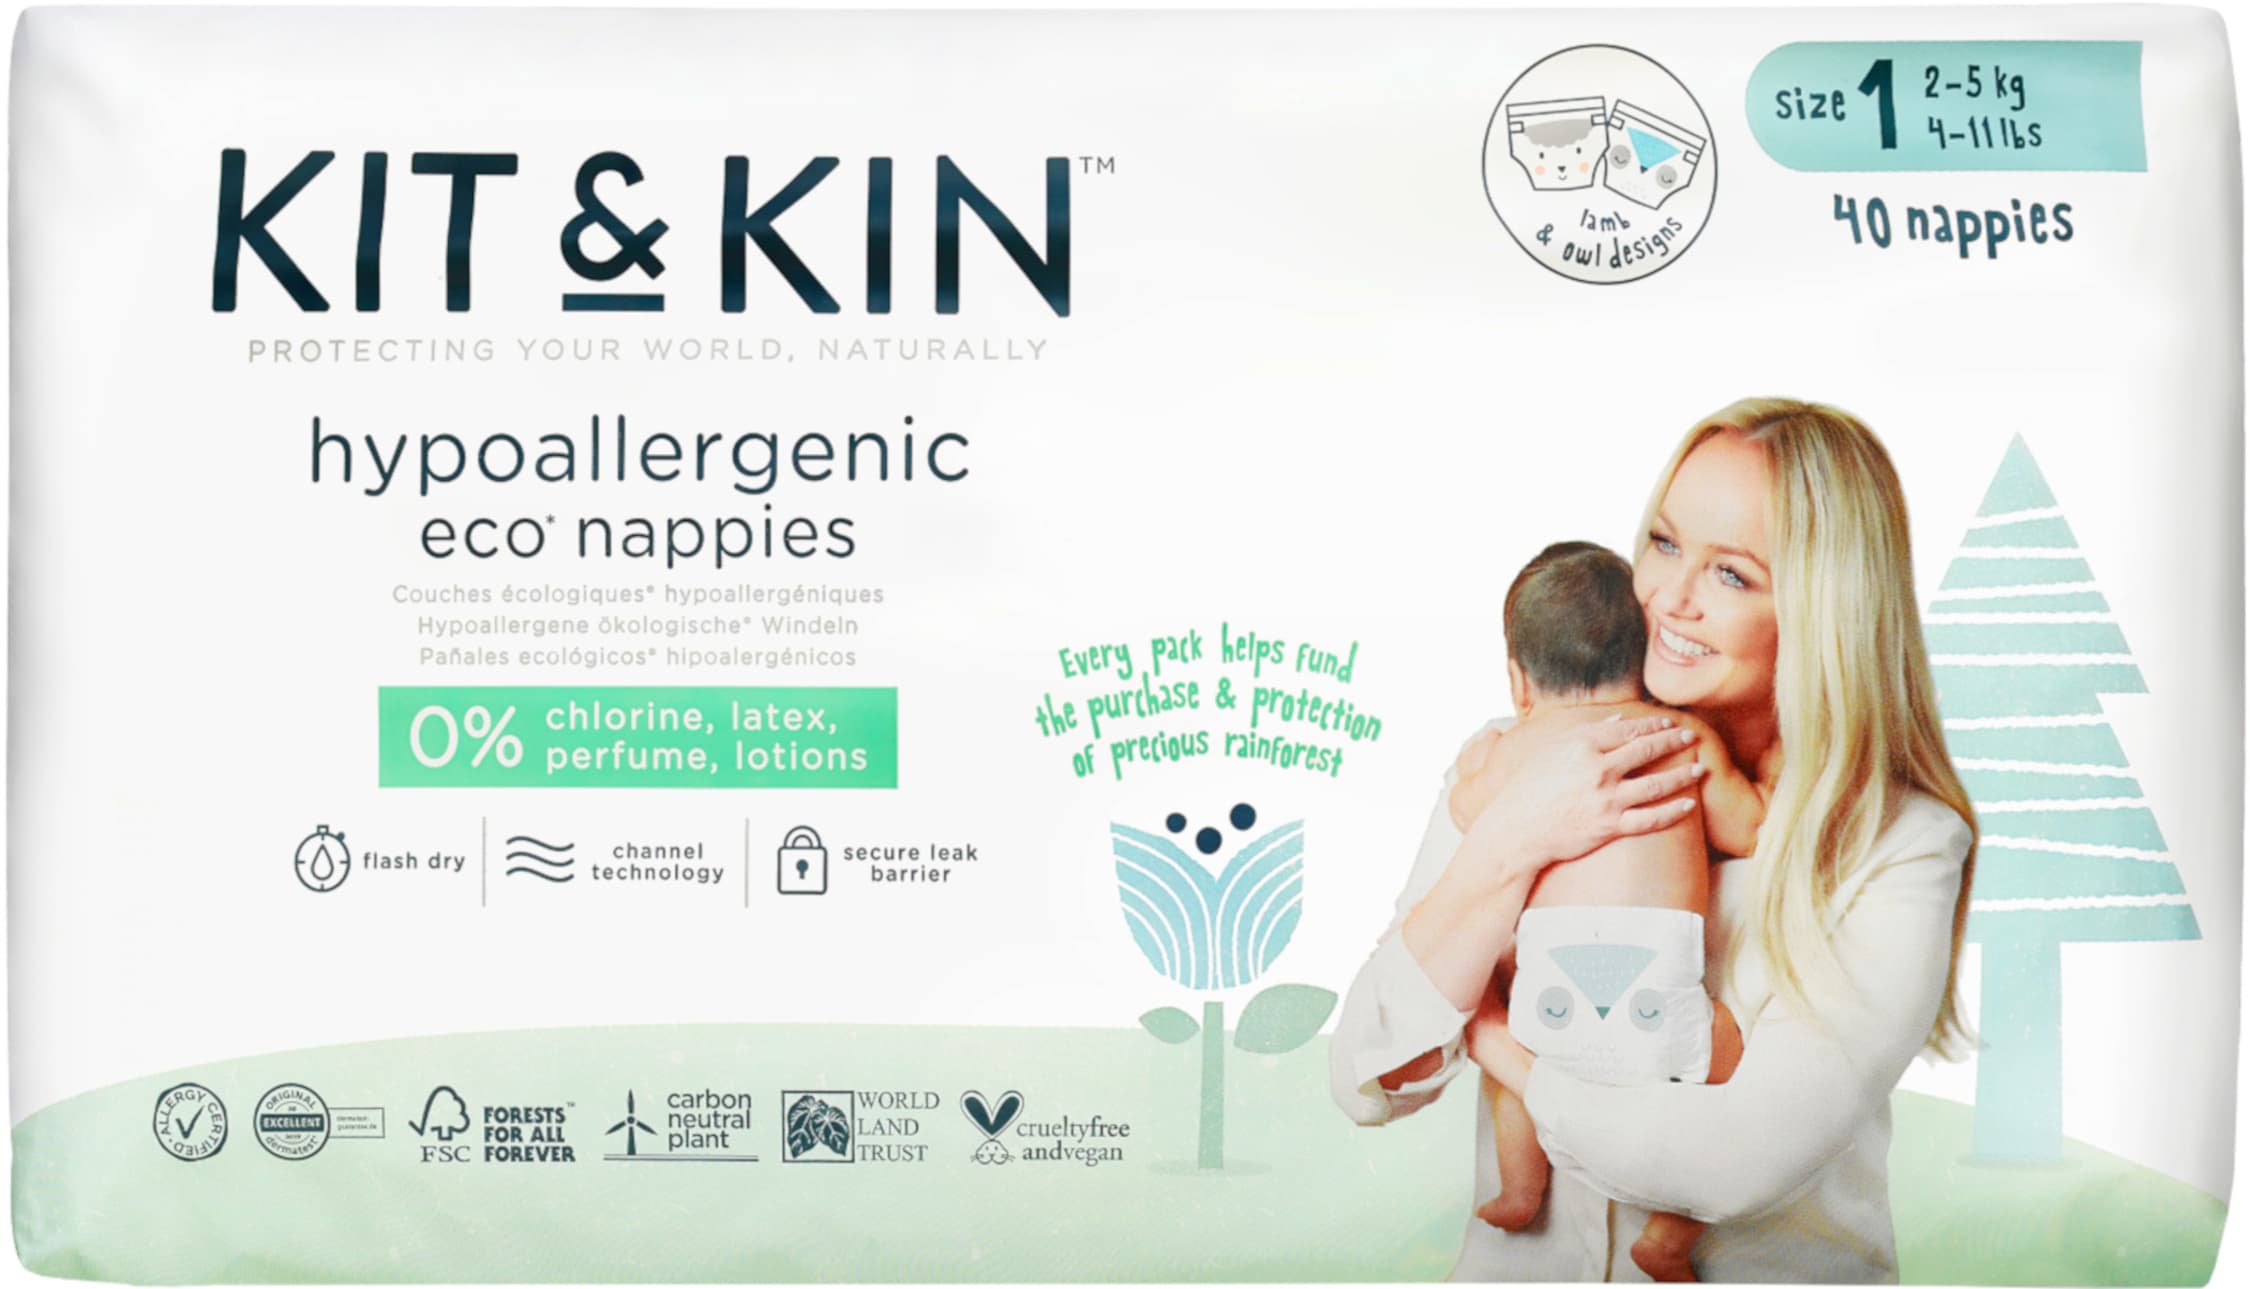 Kit & Kin Hypoallergenic Eco Nappies Size 1 2-5kg RRP 8 CLEARANCE XL 6.99